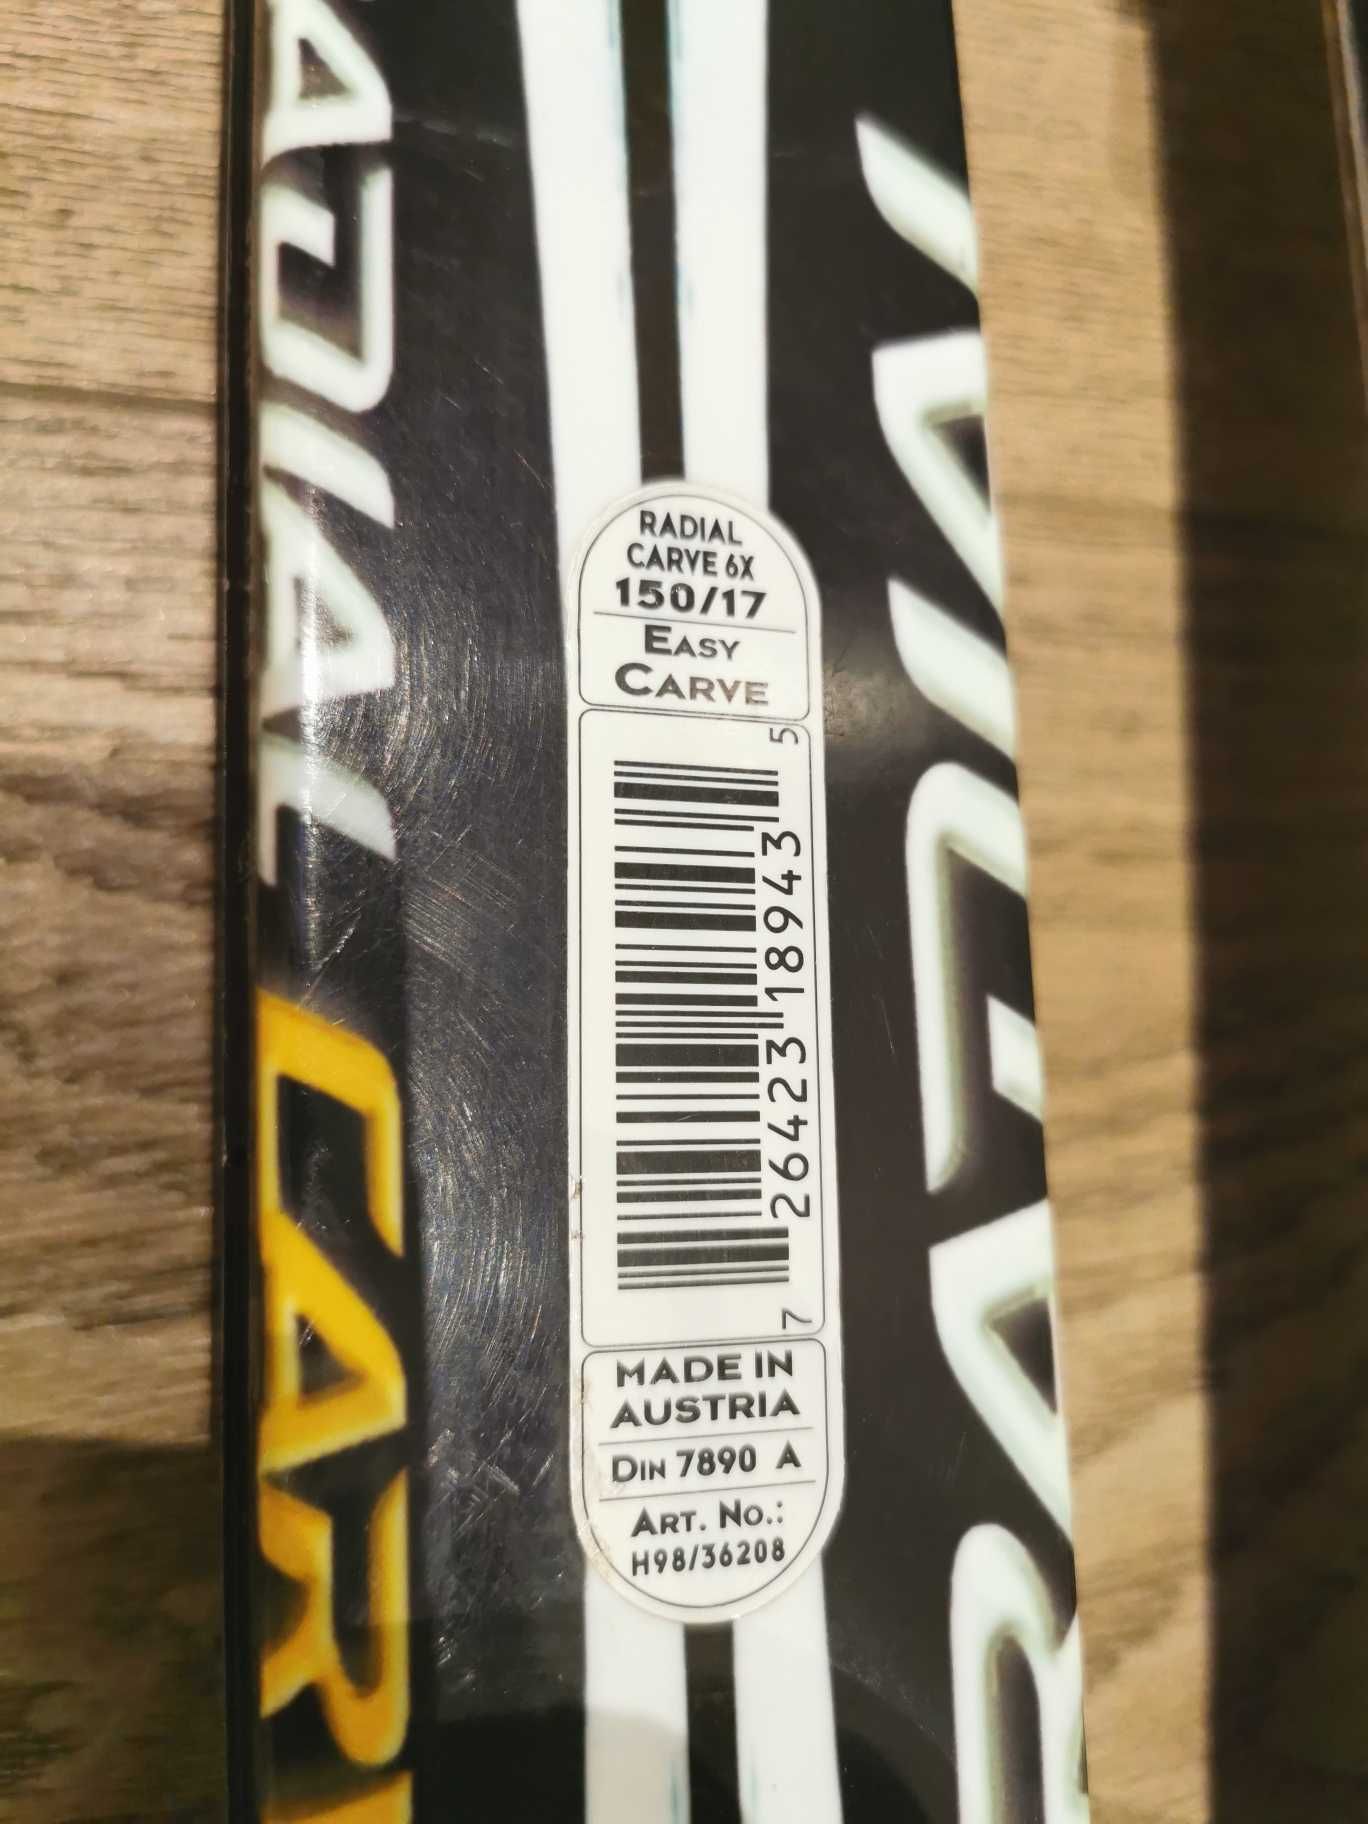 narty head radial 6x 150/17 easy carve